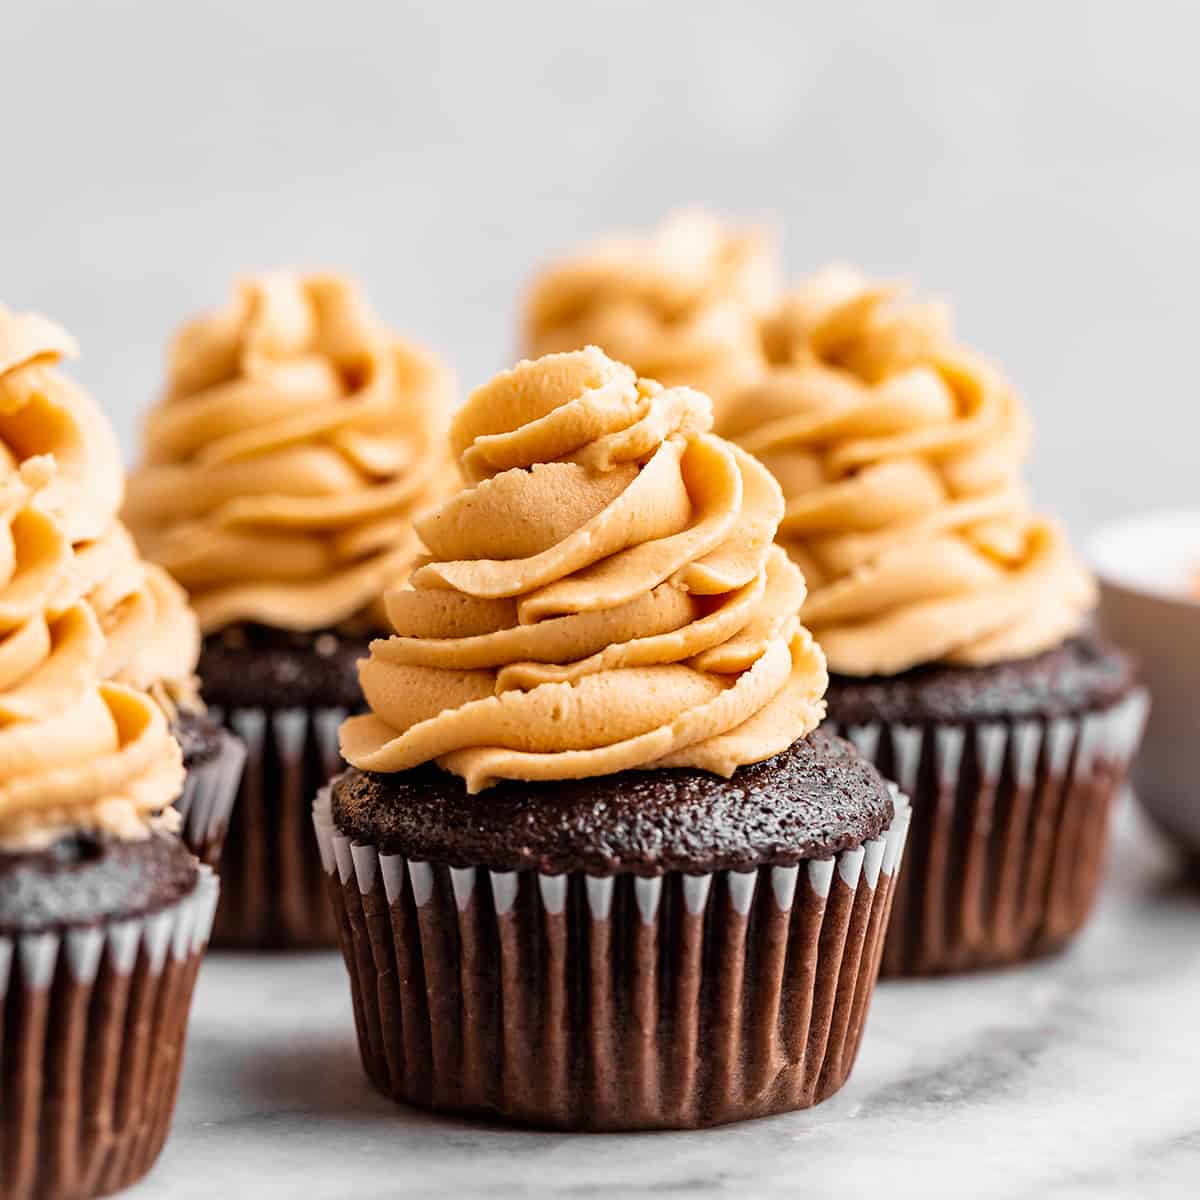 Peanut Butter Frosting piped on top of chocolate cupcakes